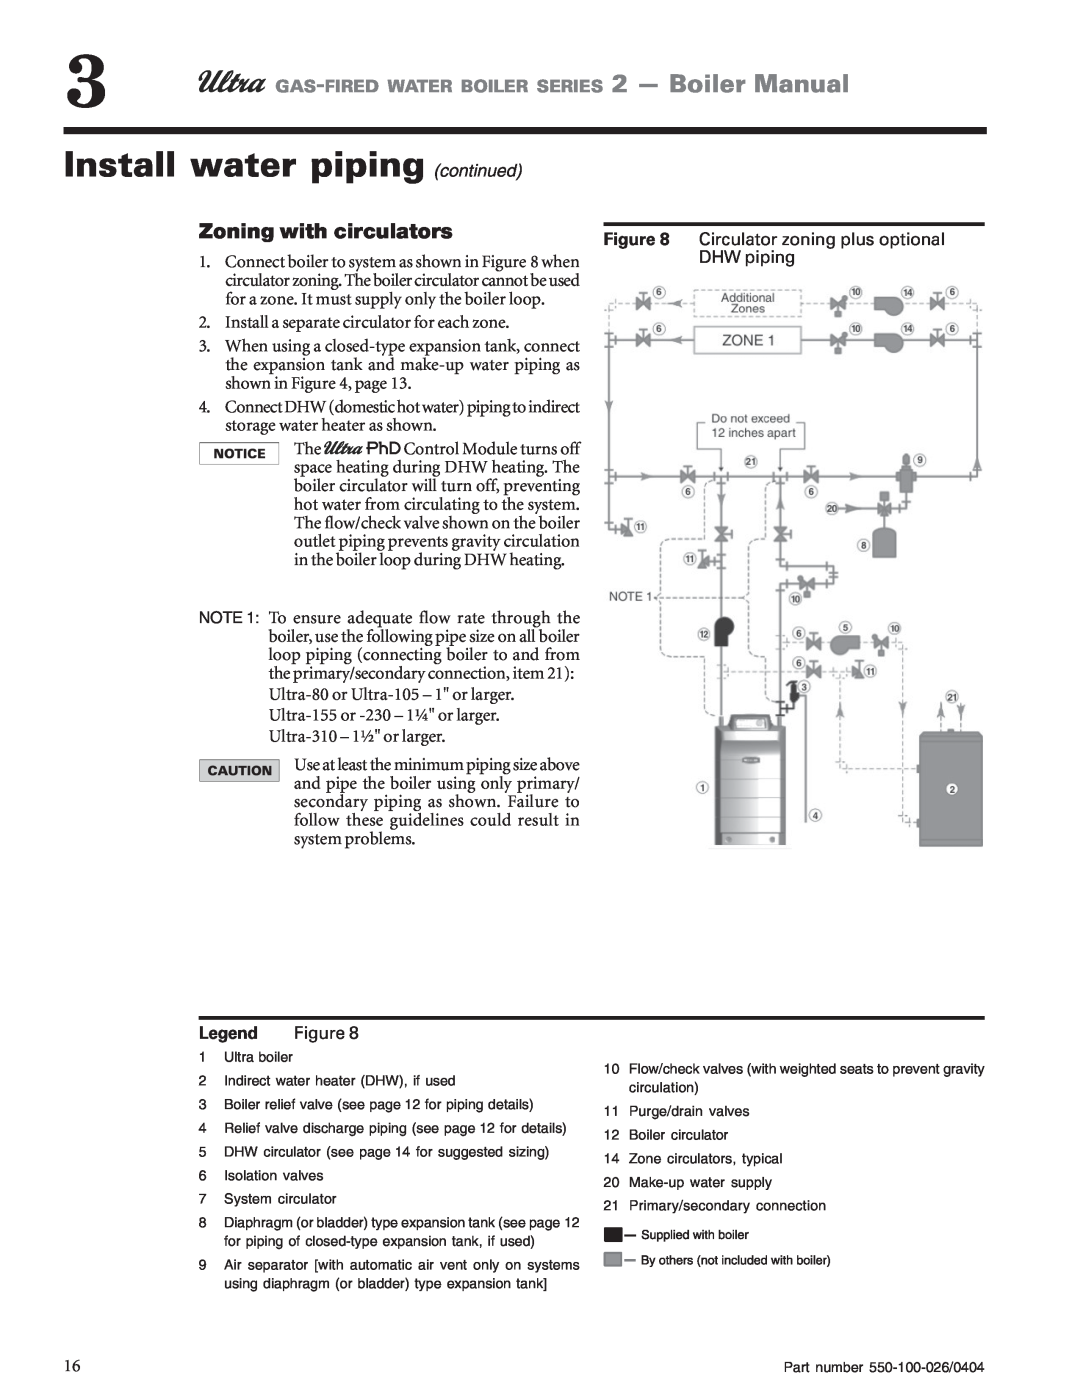 Ultra electronic 105 Install water piping continued, Zoning with circulators, Circulator zoning plus optional, DHW piping 